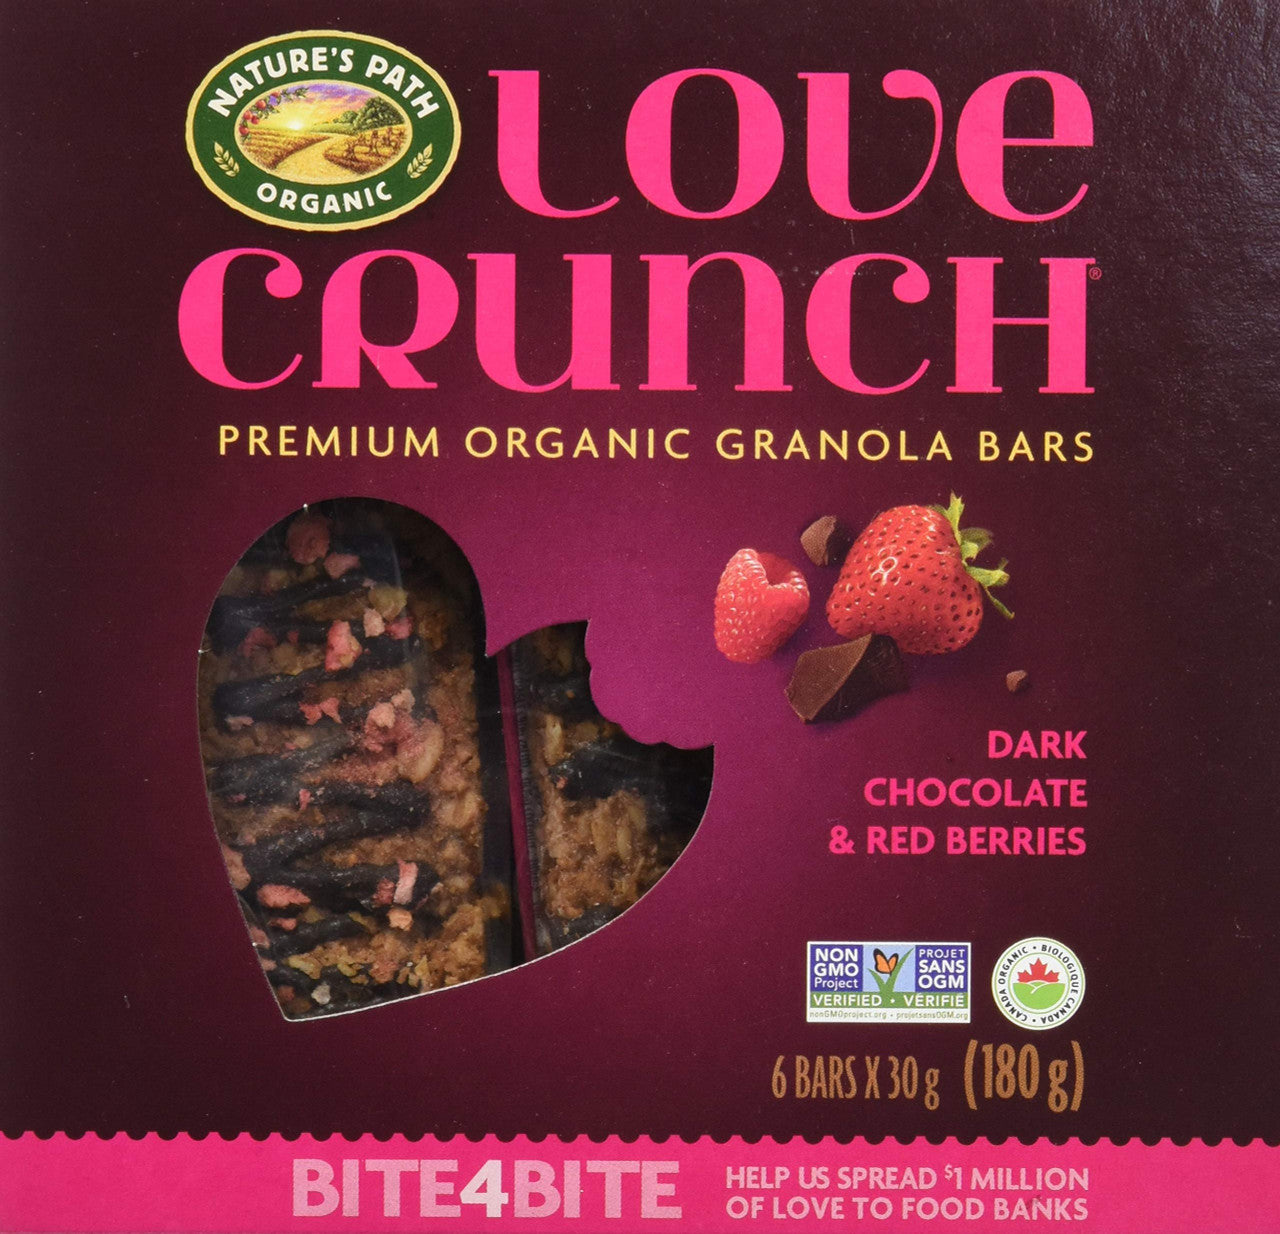 Nature's Path Organic Granola Bar - Love Crunch Red Berries and Dark Chocolate, 180g/6.3oz., {Imported from Canada}